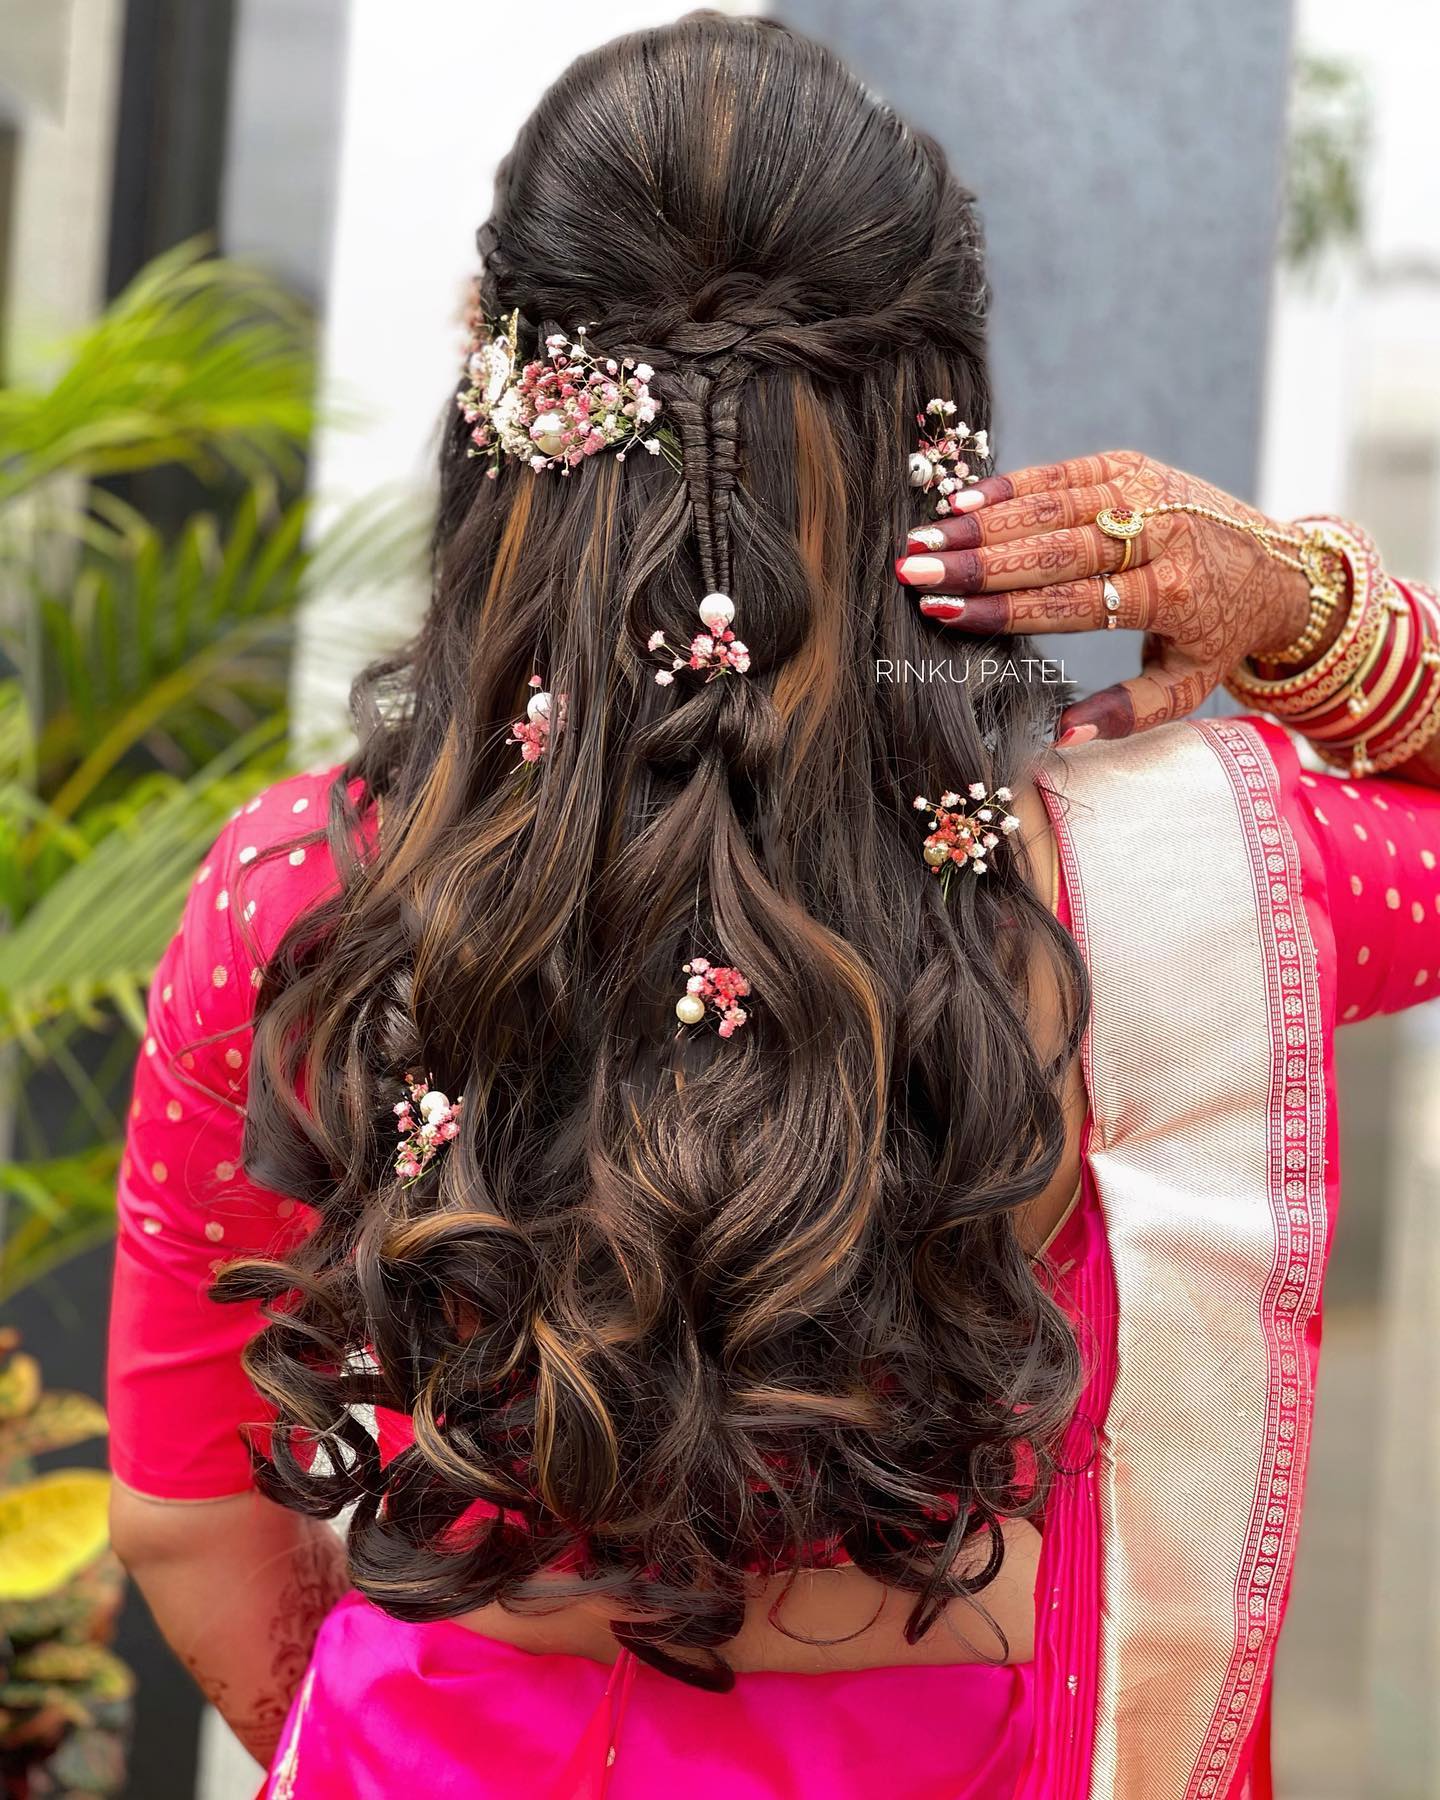 Cute-Indian-Wedding-Hair-Style-for-Women-with-Images-of-Wedding-Hairstyle-Stylish-on-Ideas  – The Gilded Pear